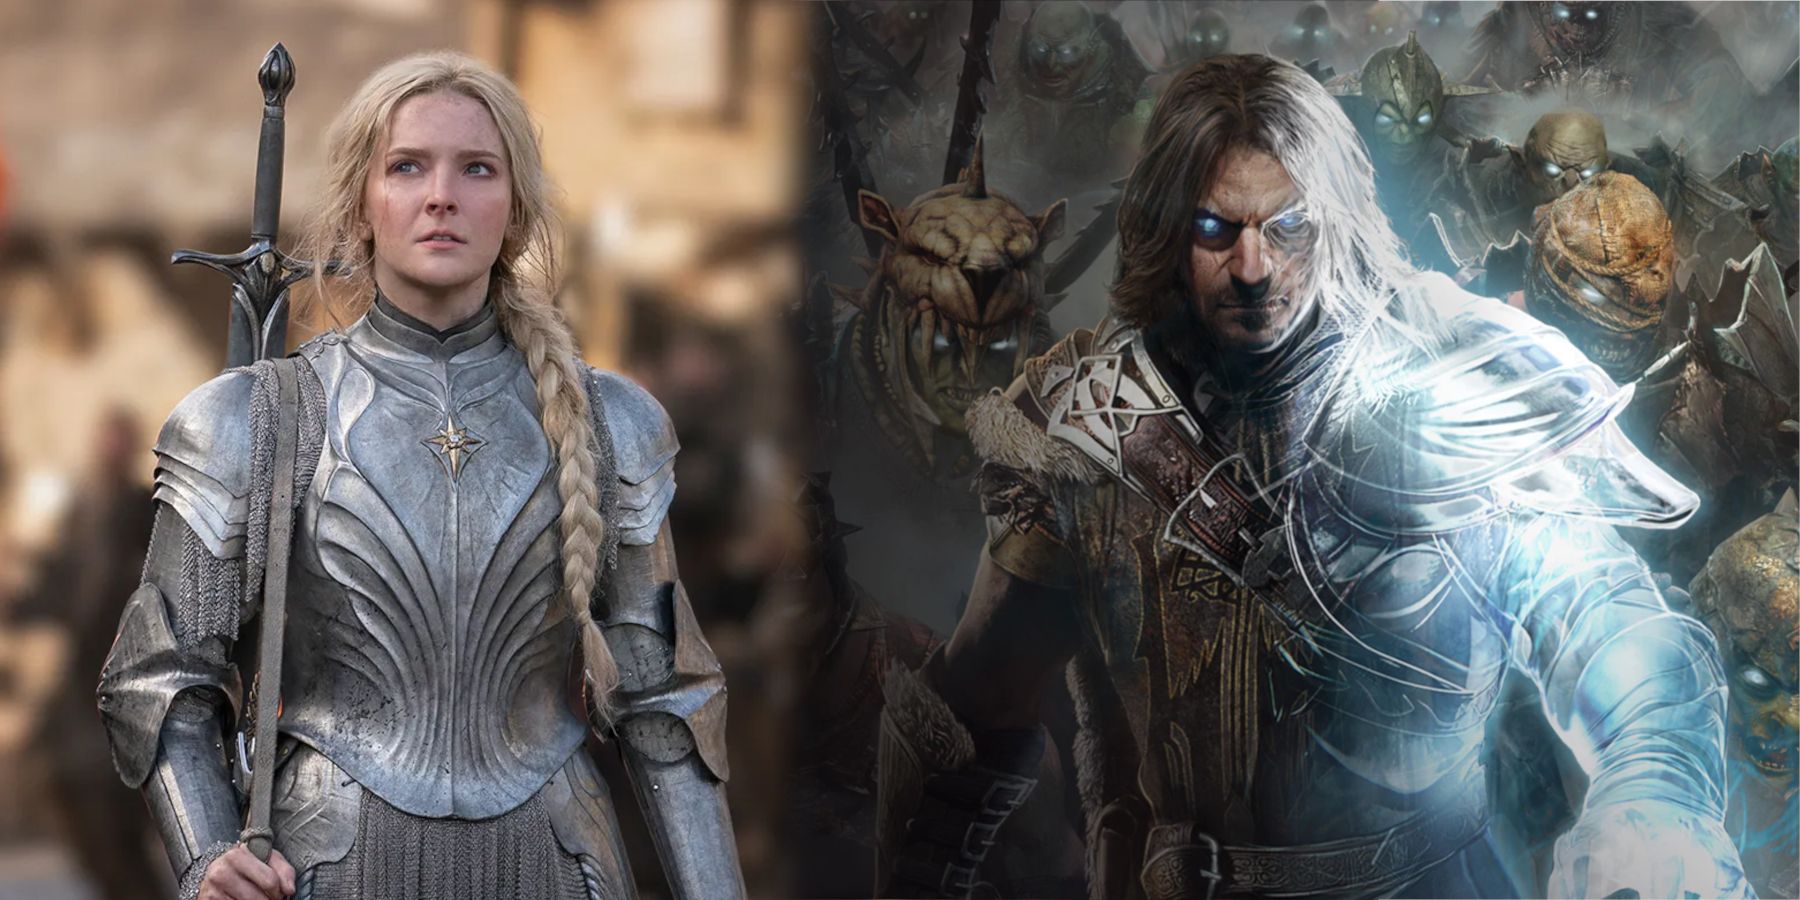 A split screen between Galadriel from the show Rings of Power and Talion from the game Shadow of Mordor